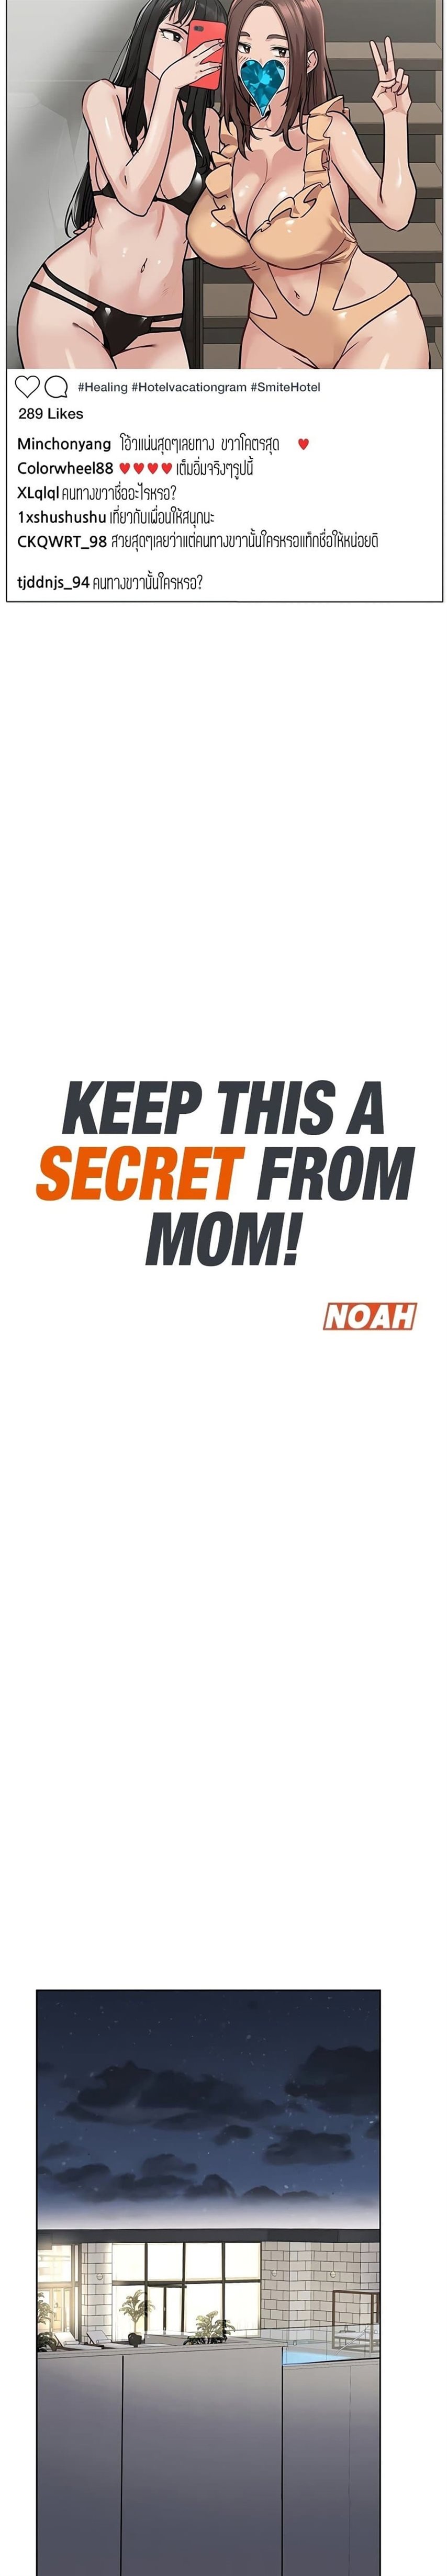 Keep it a secret from your mother 42 04